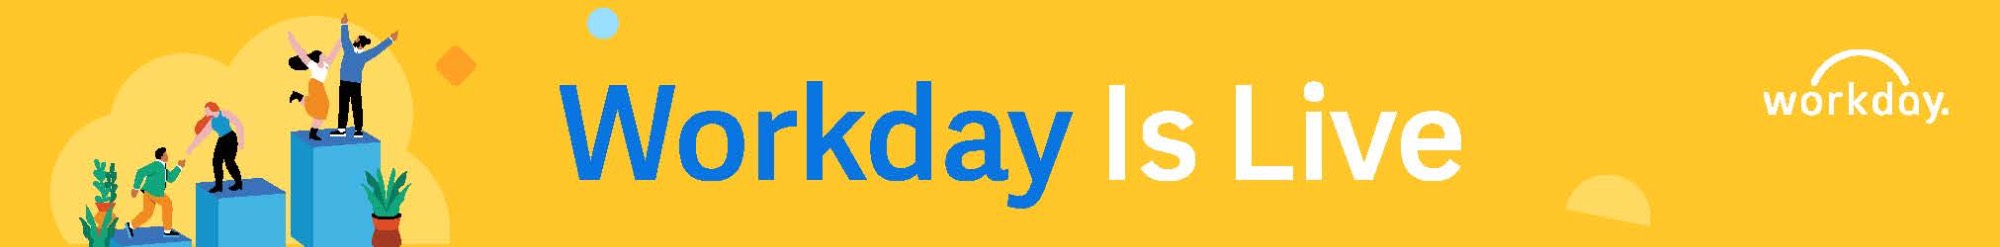 Workday is Live